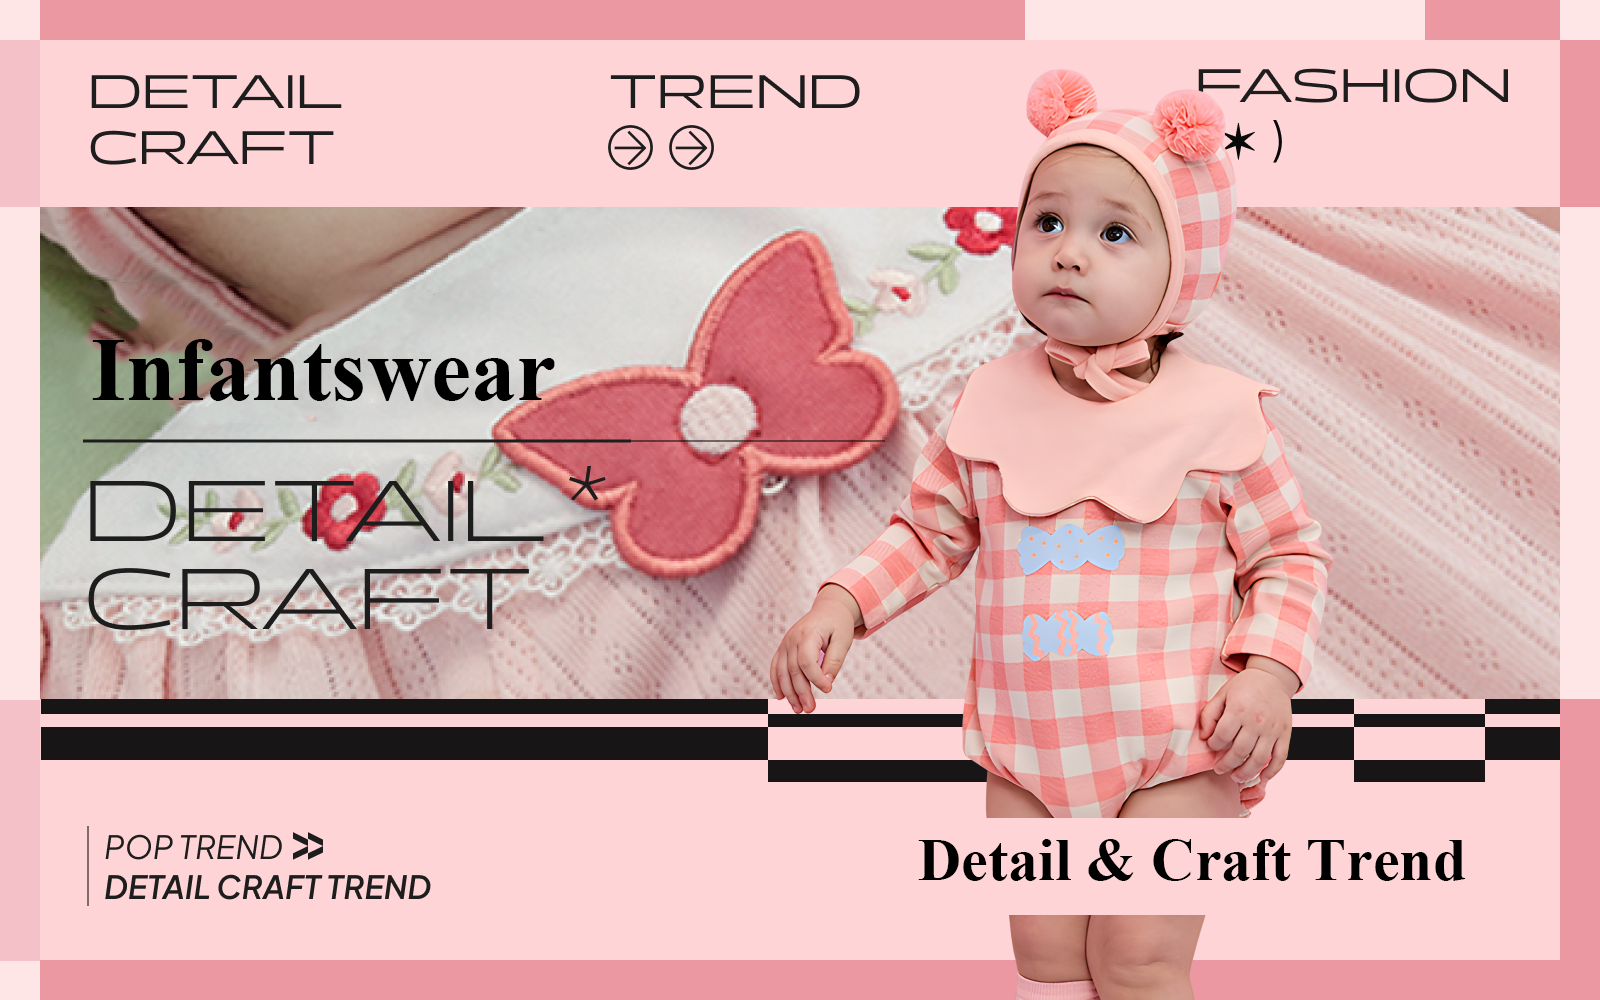 The Detail & Craft Trend for Infantswear